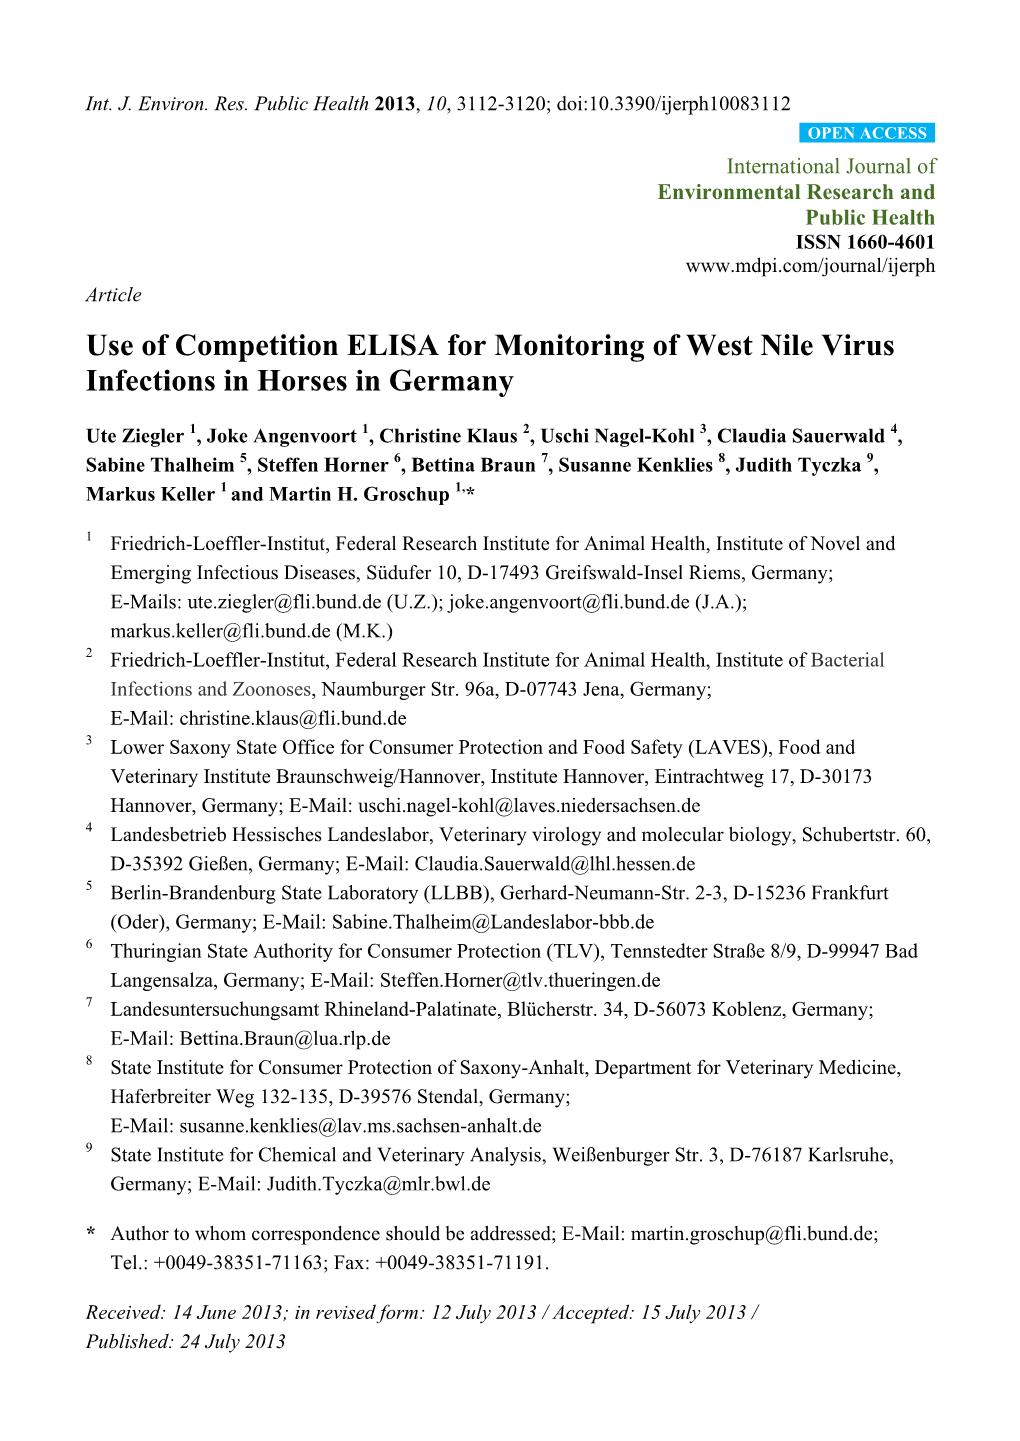 Use of Competition ELISA for Monitoring of West Nile Virus Infections in Horses in Germany